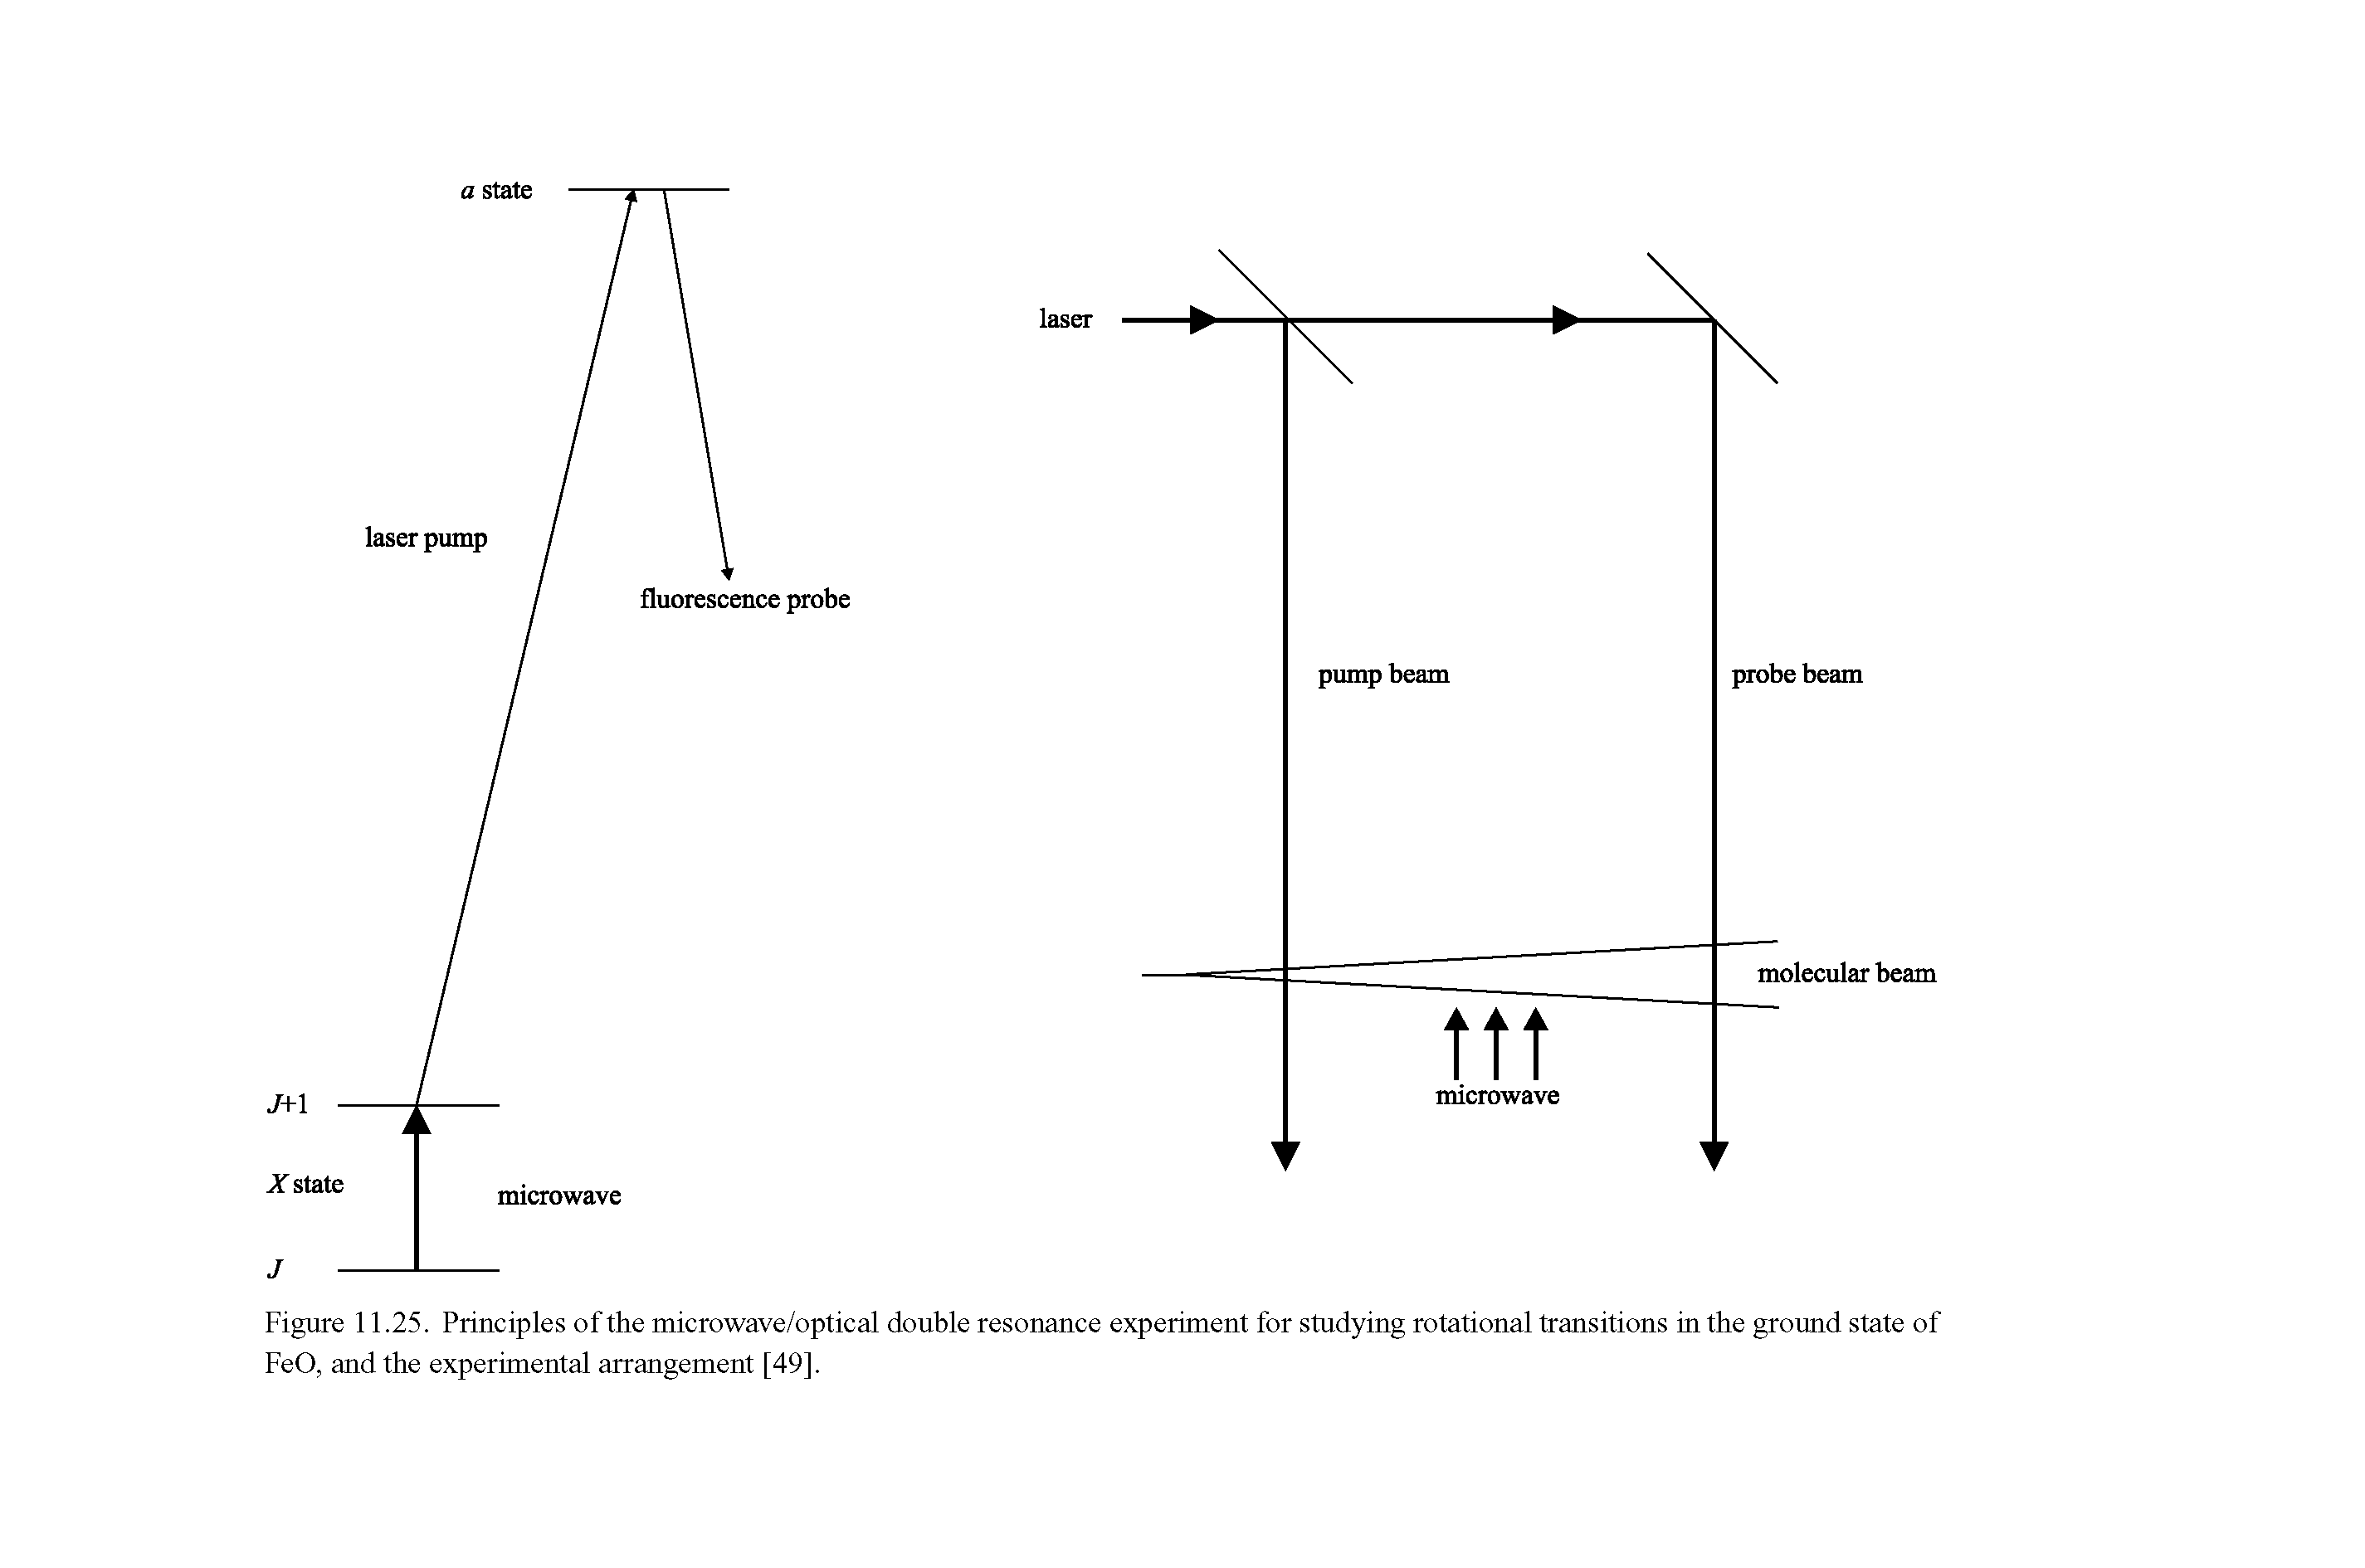 Figure 11.25. Principles of the microwave/optical double resonance experiment for studying rotational transitions in the ground state of FeO, and the experimental arrangement [49].